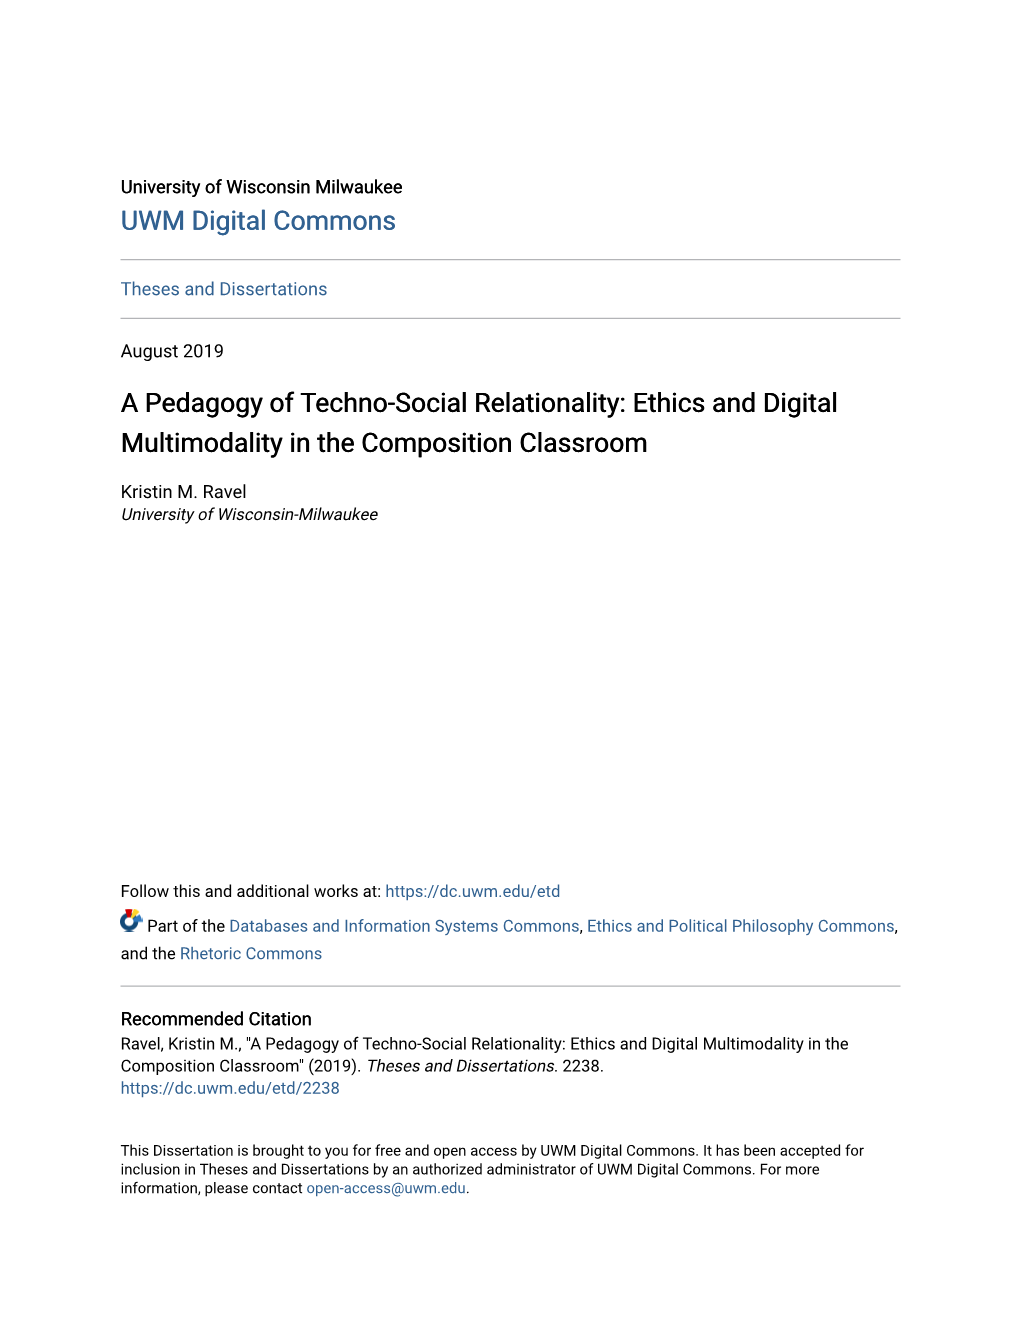 A Pedagogy of Techno-Social Relationality: Ethics and Digital Multimodality in the Composition Classroom